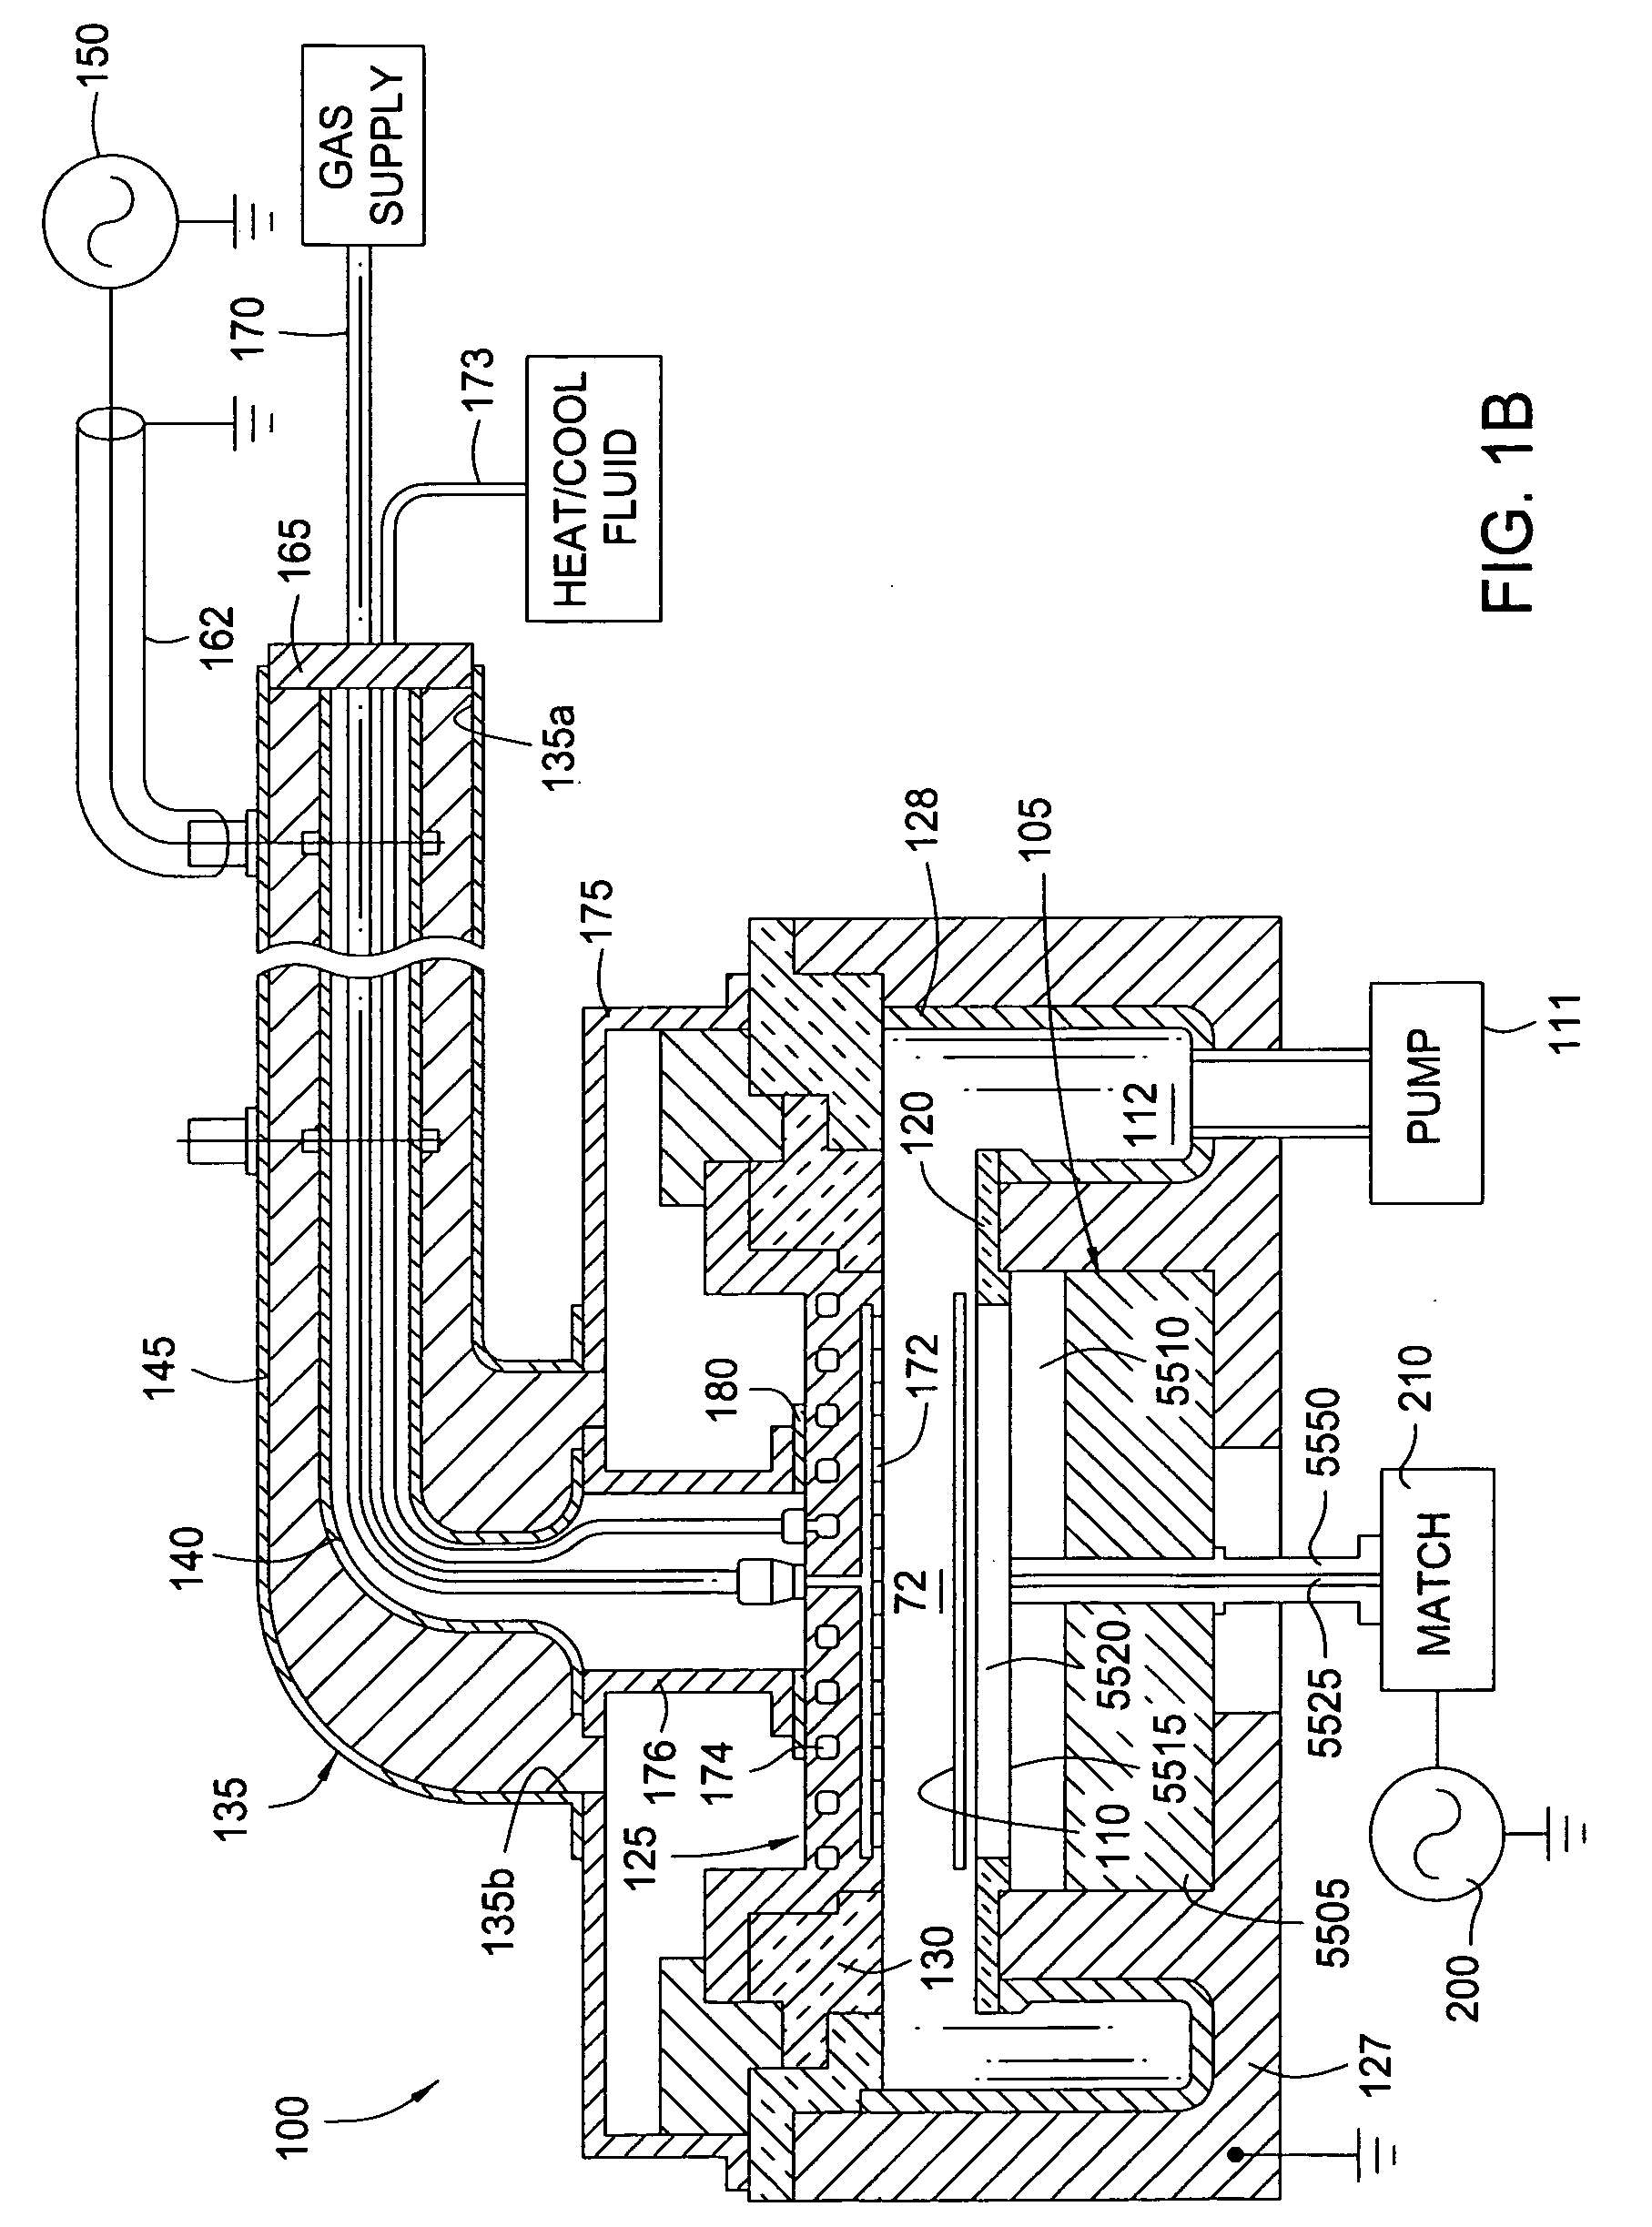 Method and apparatus to confine plasma and to enhance flow conductance